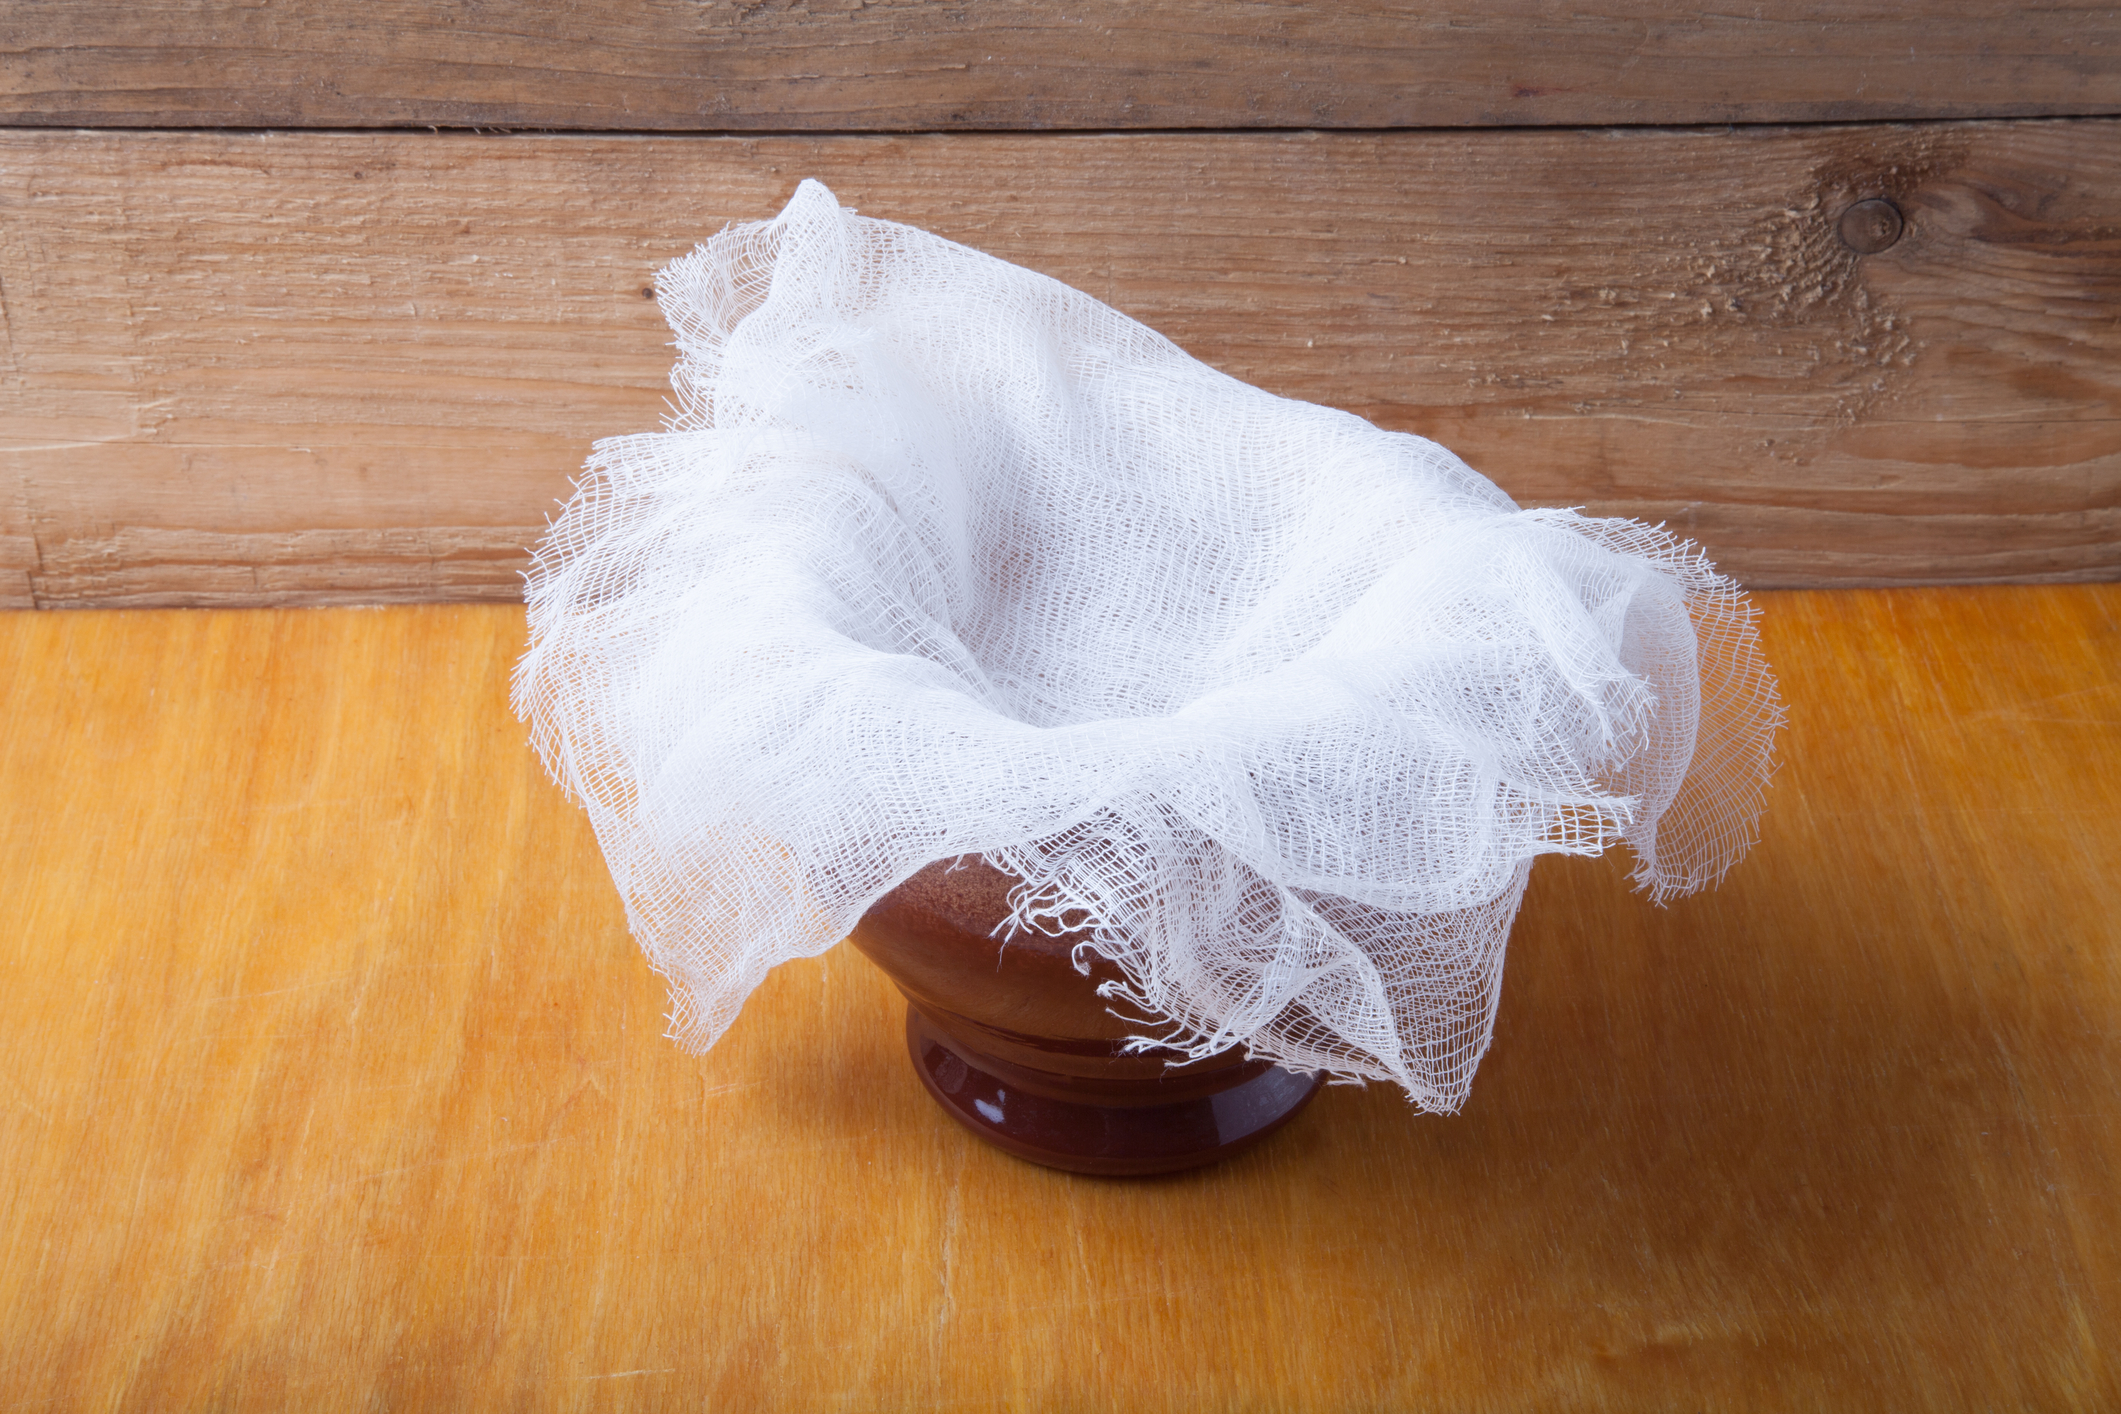 7 Clever Uses for Cheesecloth